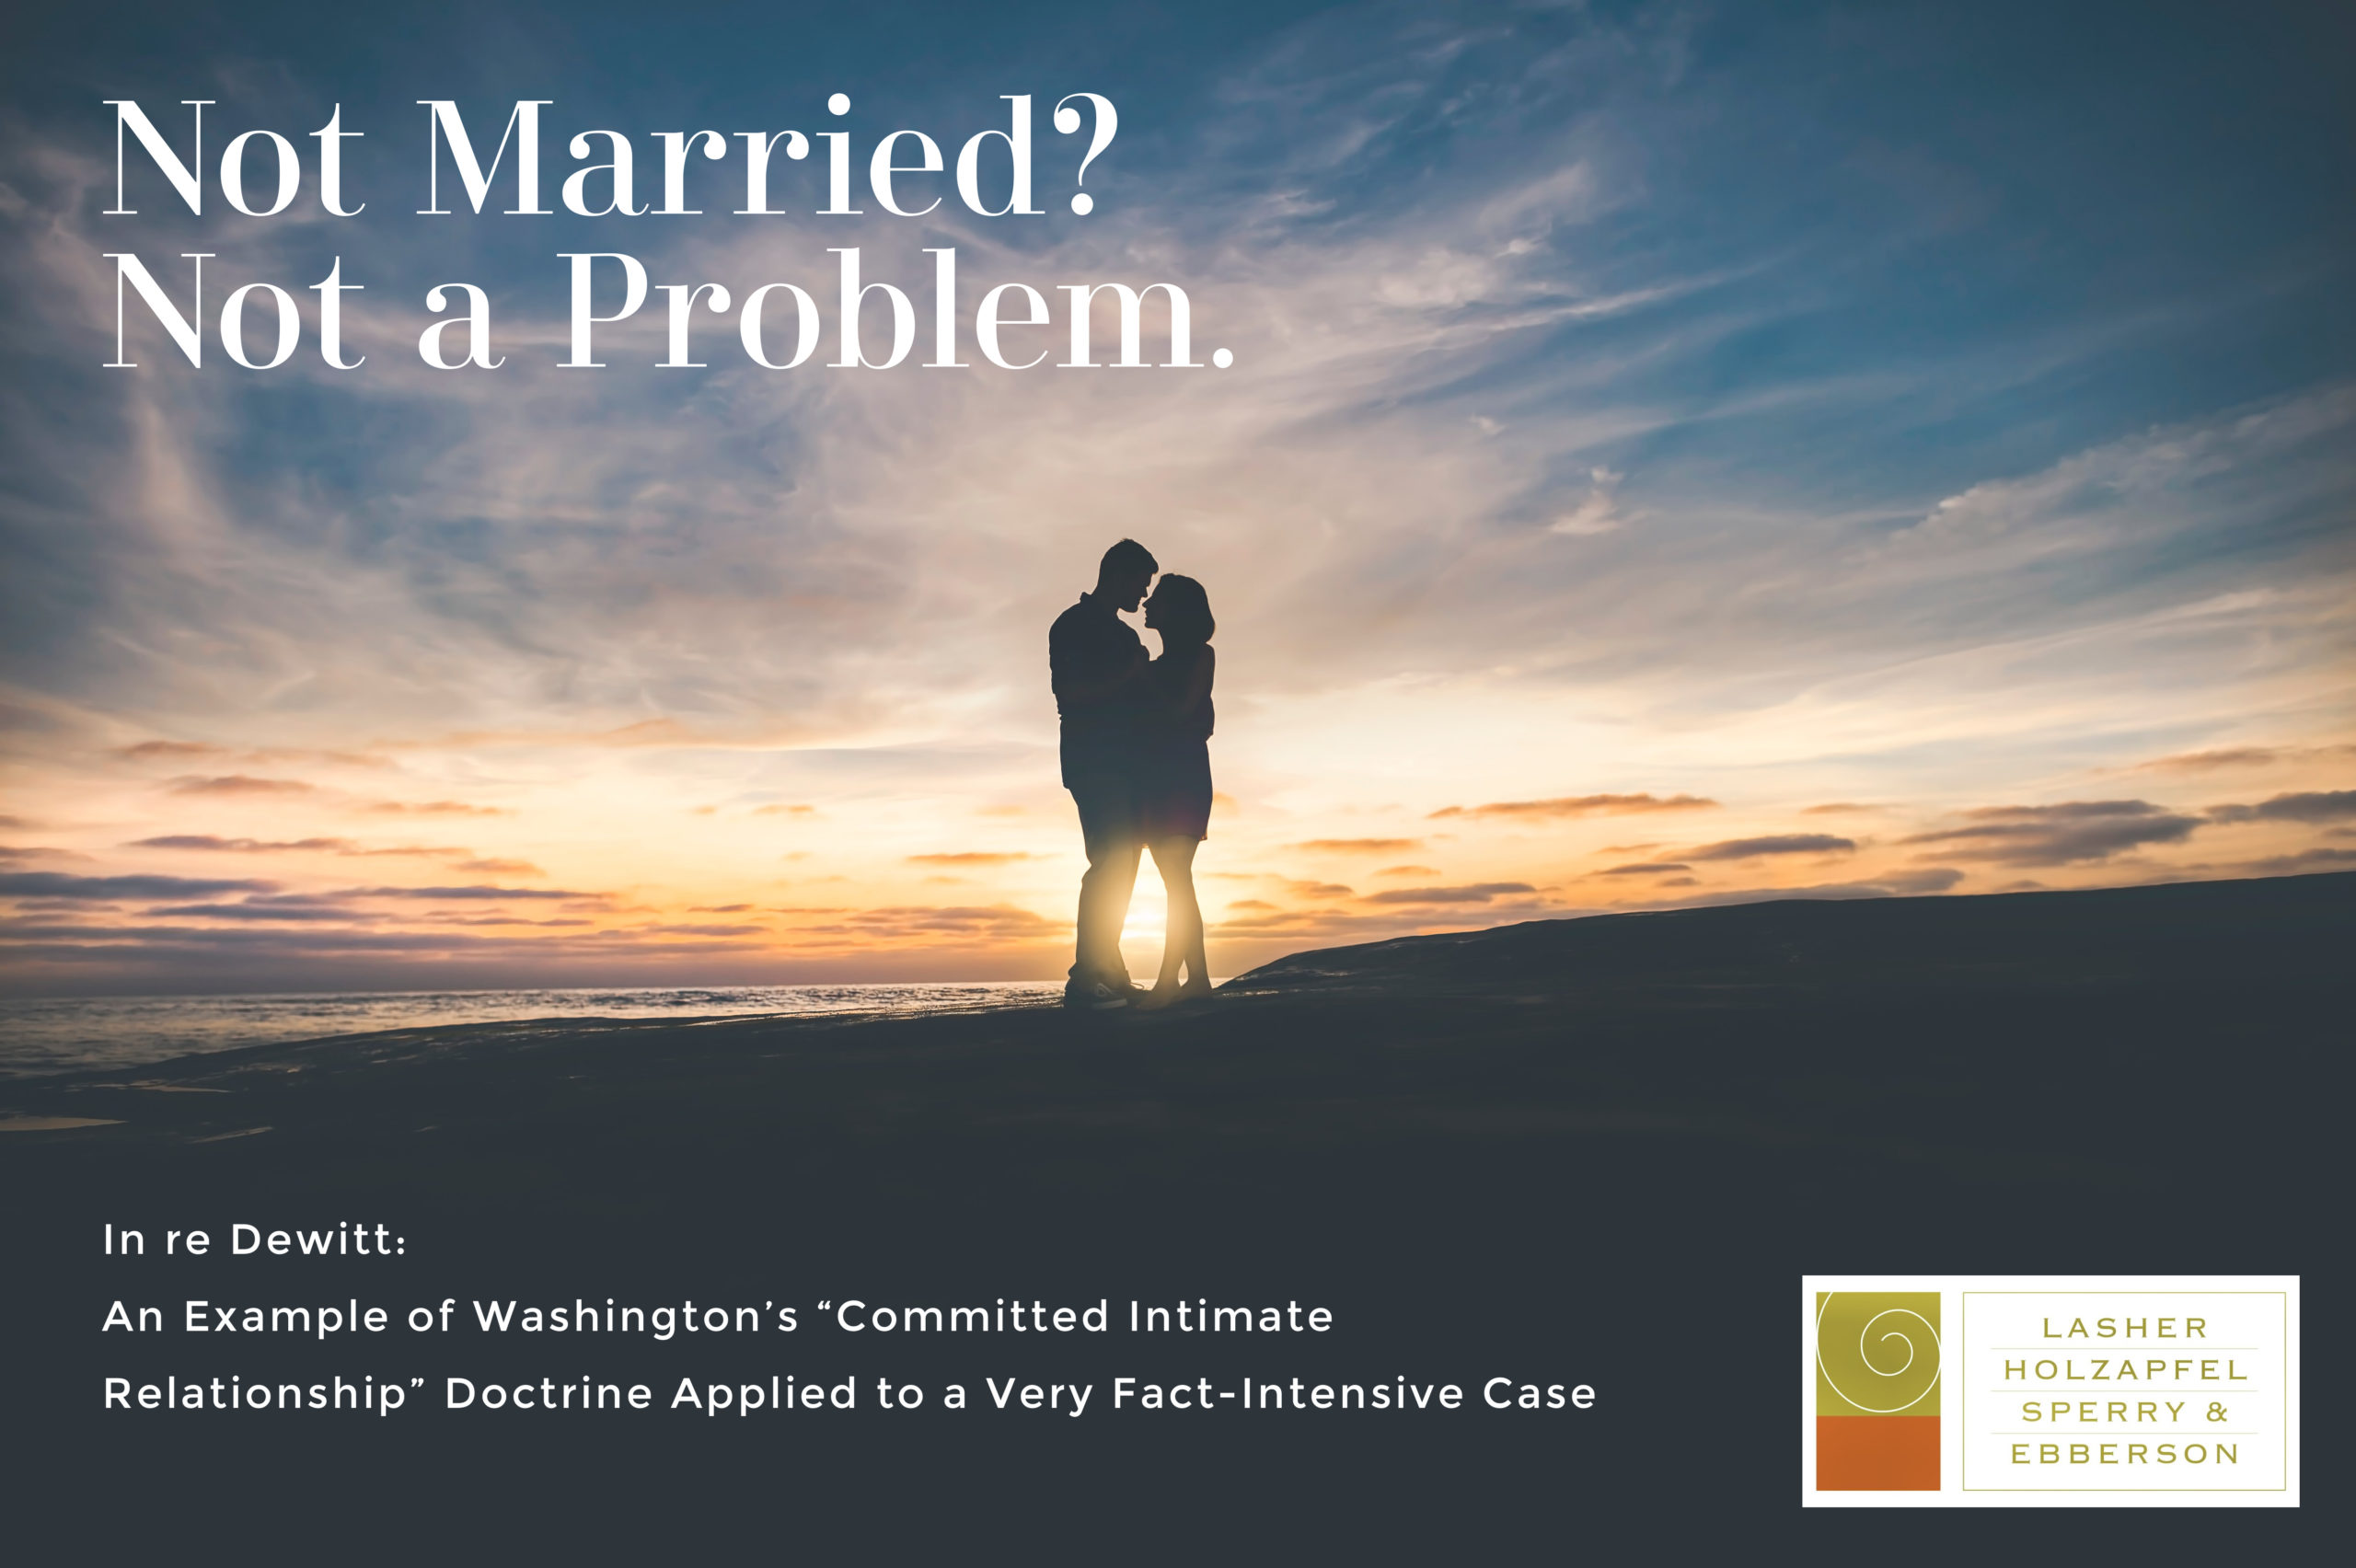 In re Dewitt: An Example of Washington’s “Committed Intimate Relationship” Doctrine Applied to a Very Fact-Intensive Case